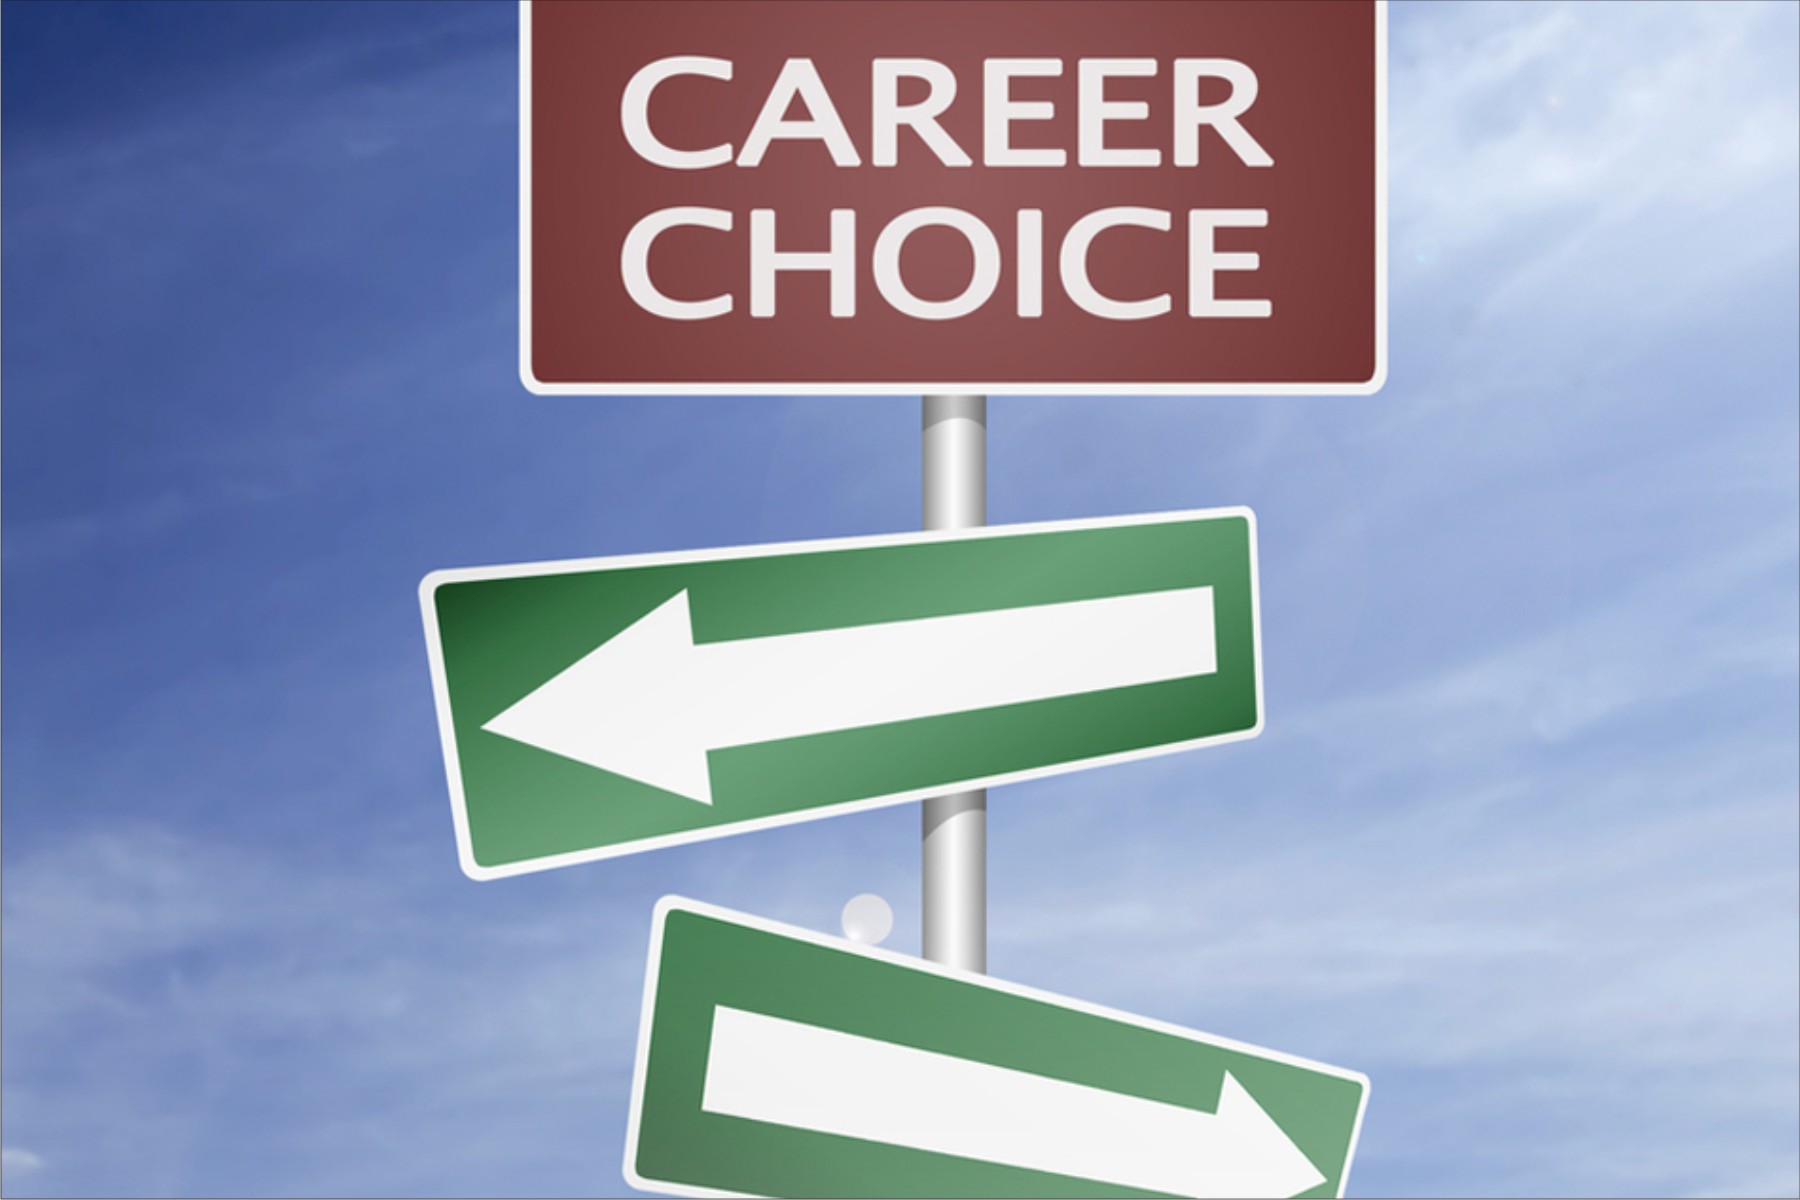 Planning your career path